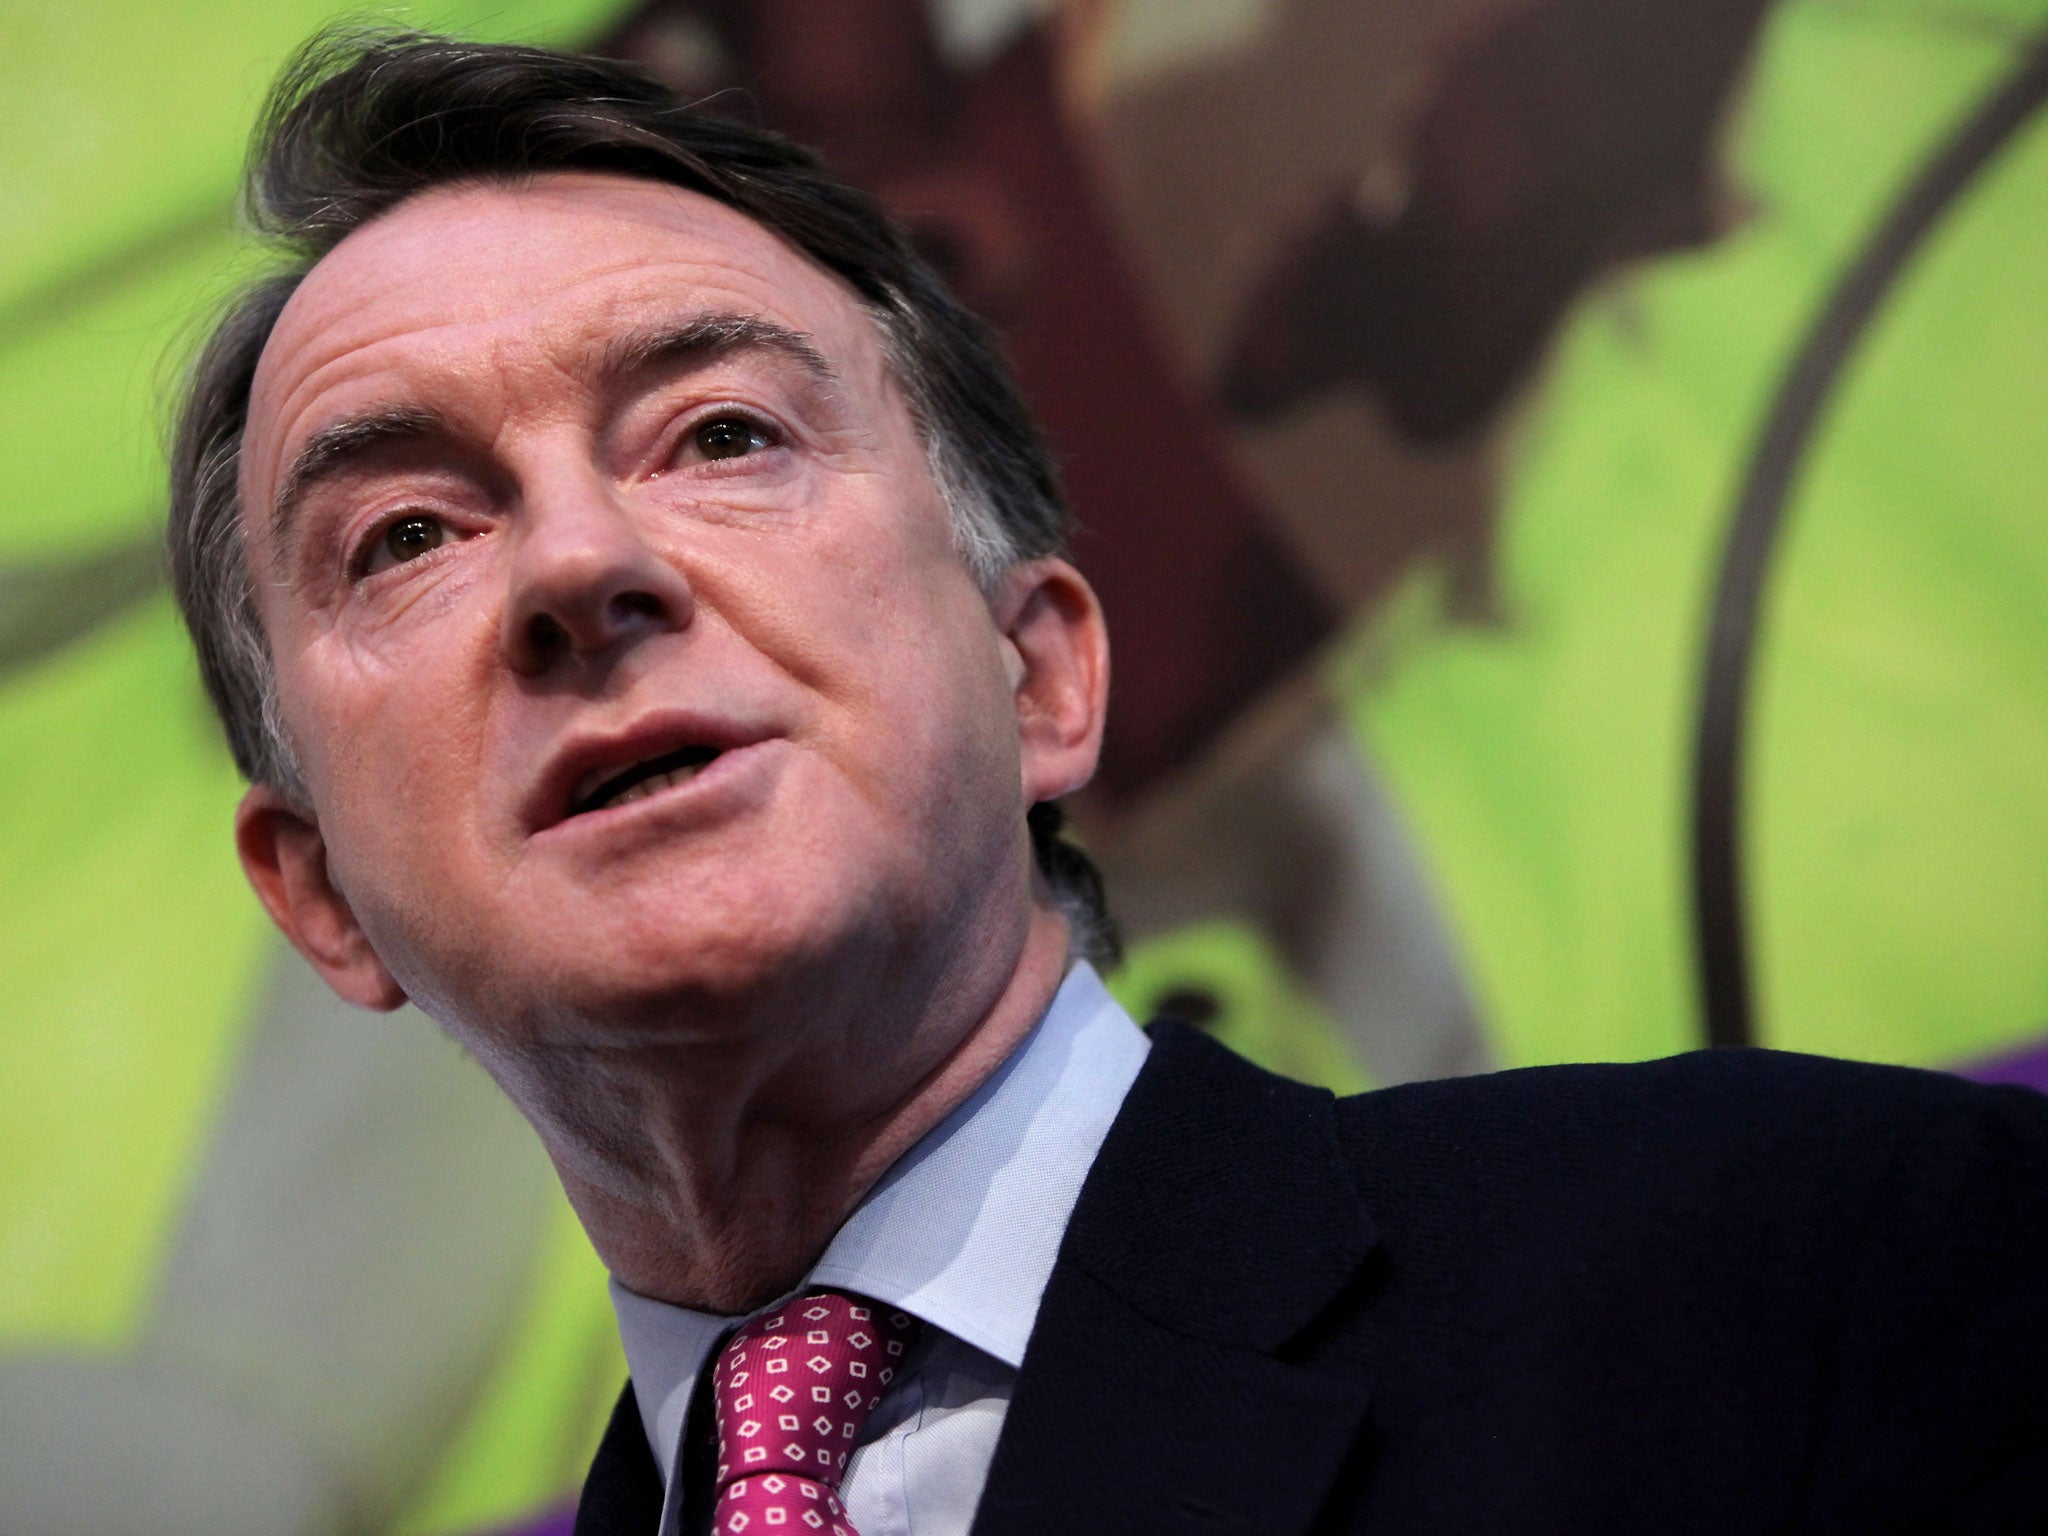 Peter Mandelson hasn’t lost his capacity for throwing incendiary truths into political debate&nbsp;